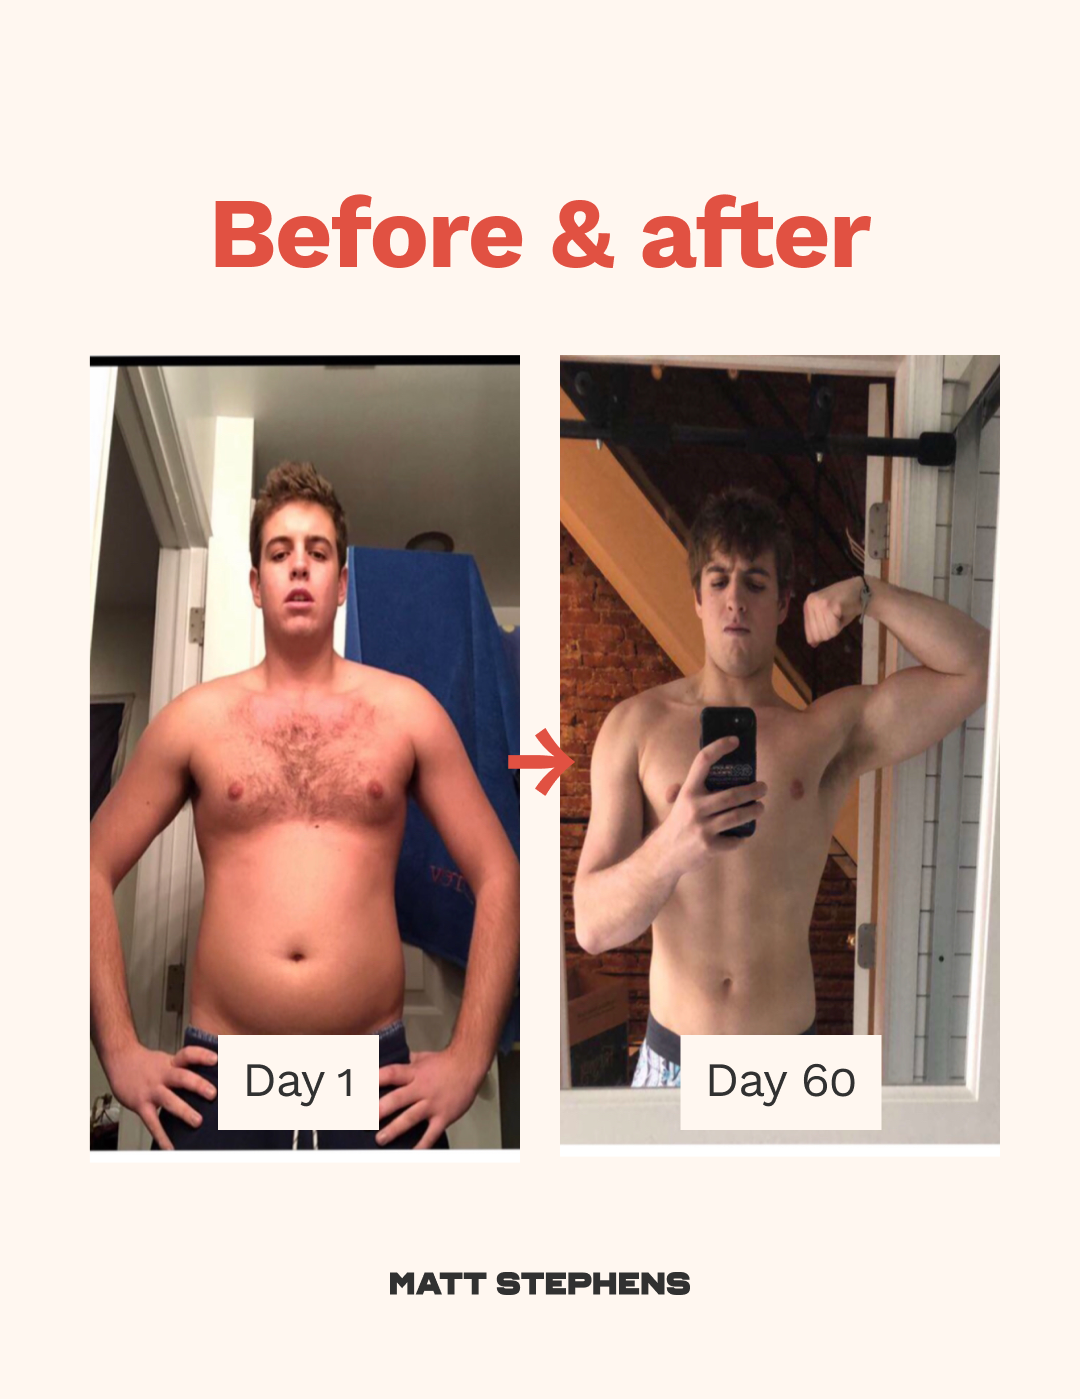 Andrew, 21, College student, Losts 12 lbs and gained muscle along the way!